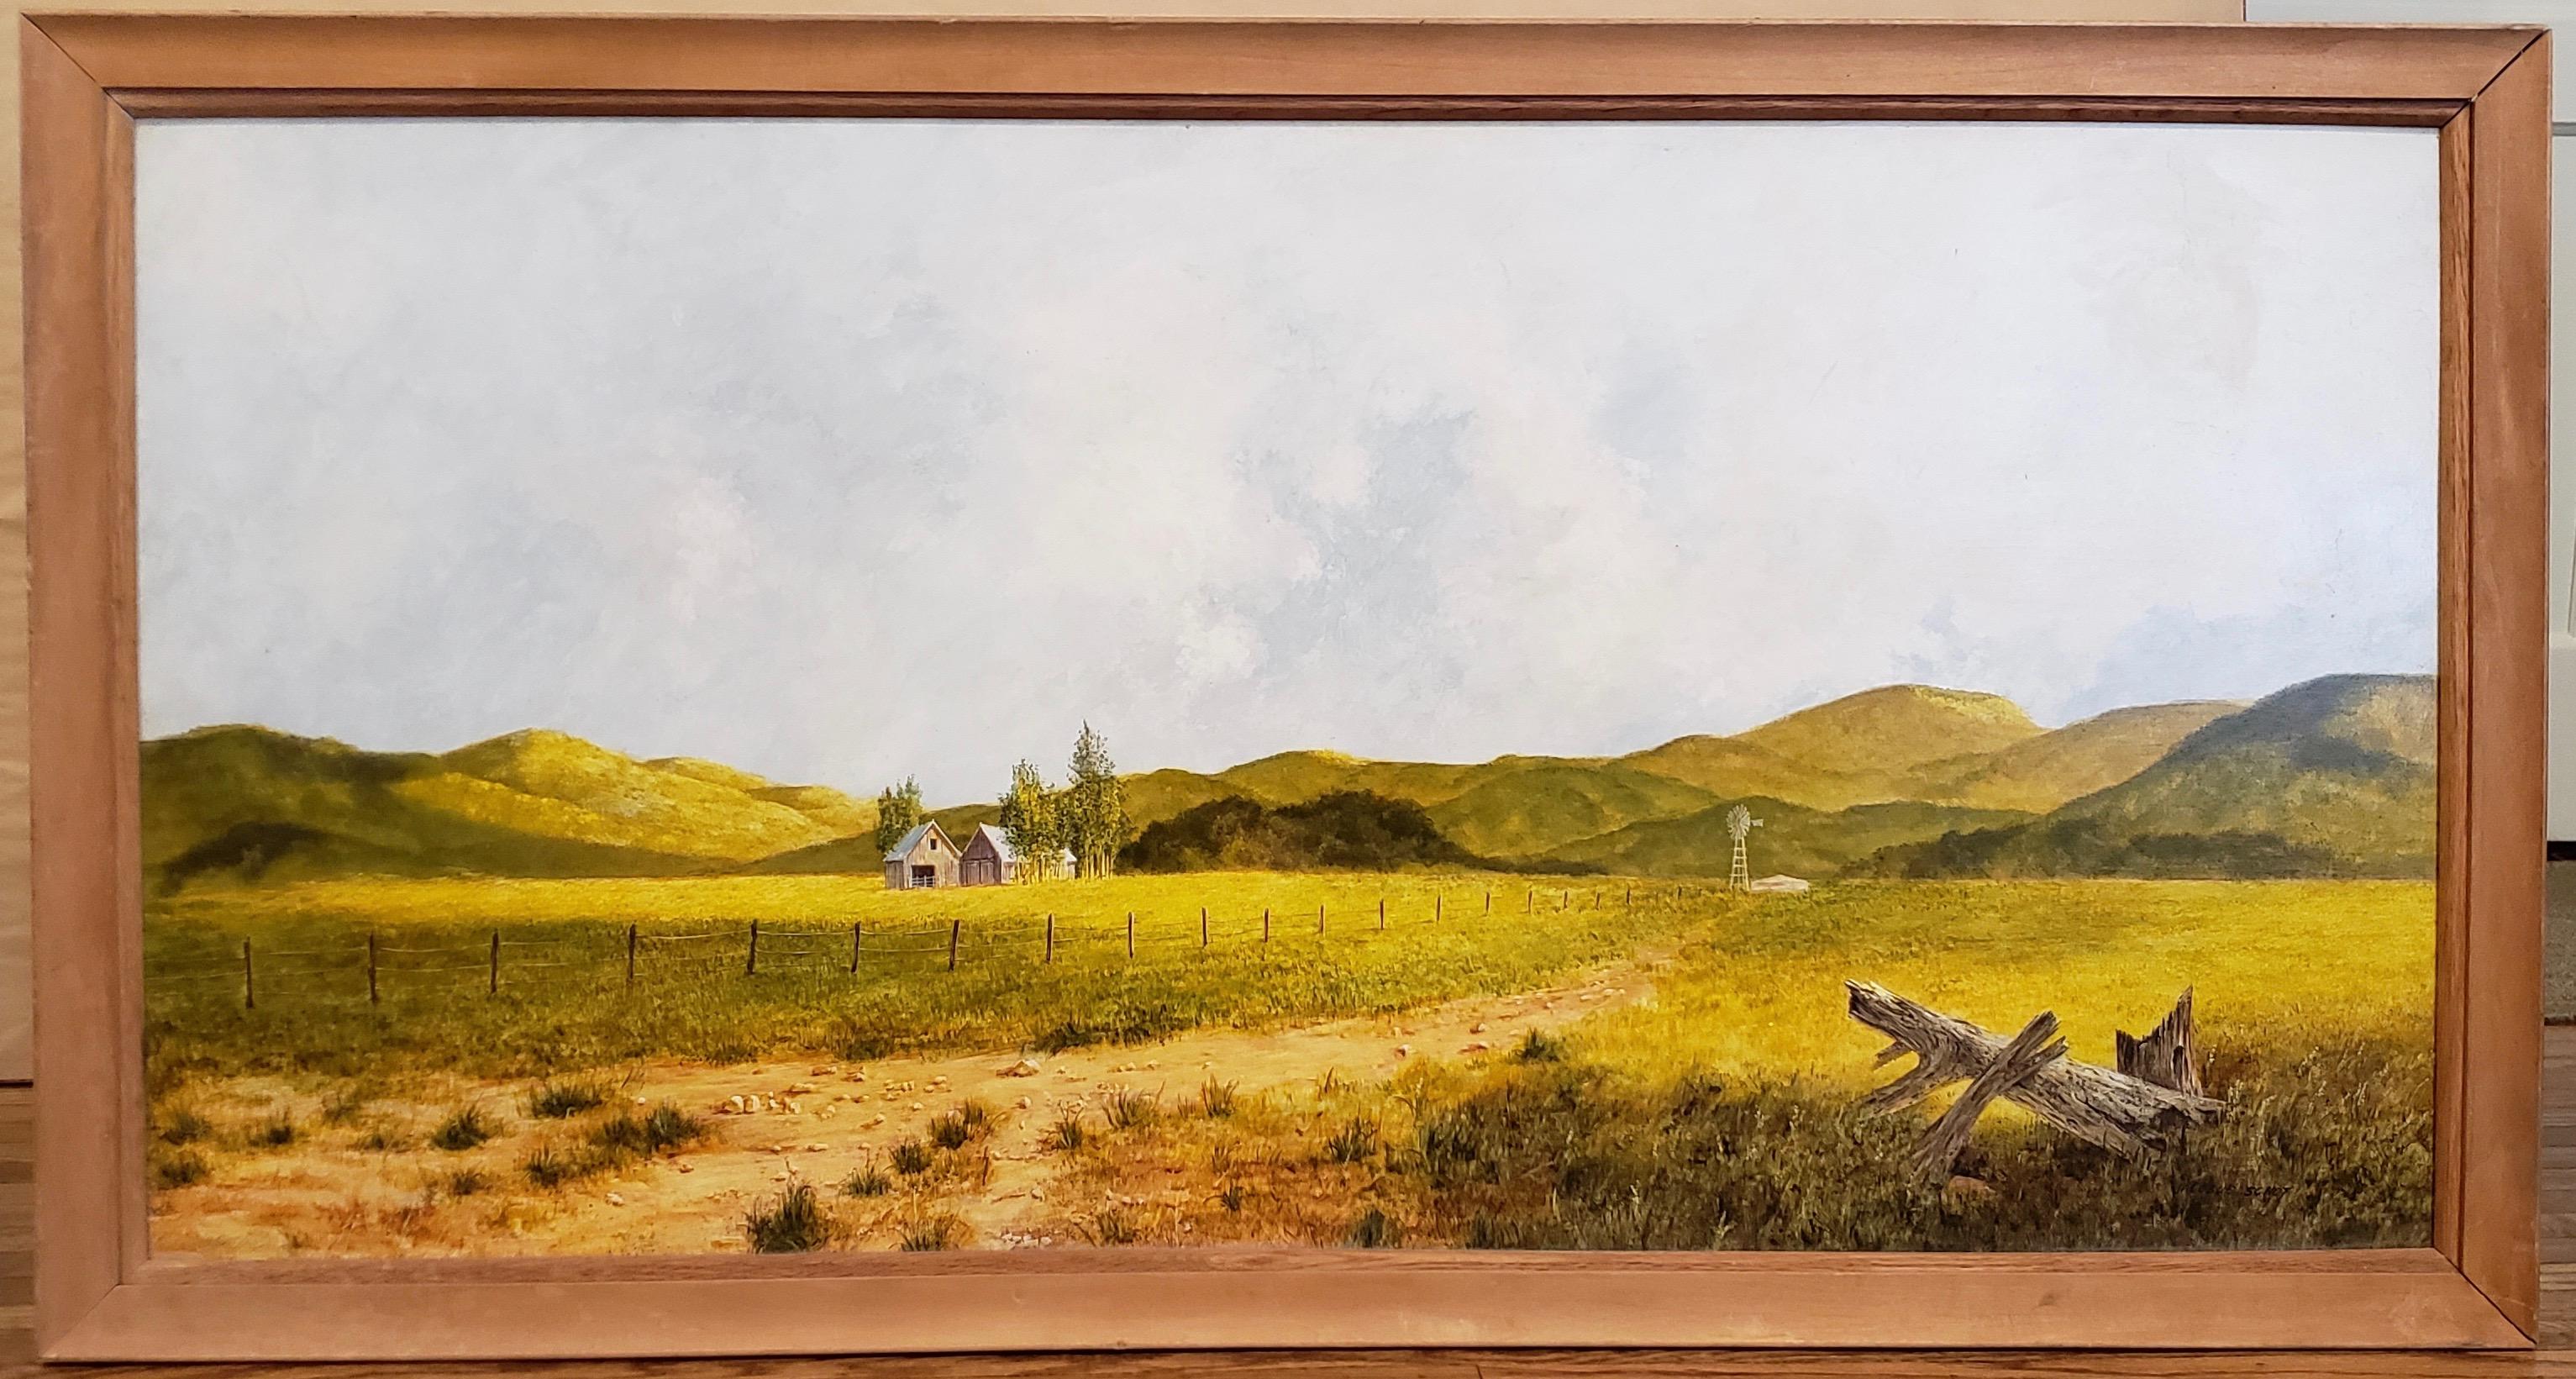 Vintage Country Farm Landscape by Jacobus Schot c.1970s

Beautiful original oil on panel by Jacobus Schot.

A farm in the country with a windmill.

Beautiful color and texture. This large painting will be the focus of any room.

Painting dimensions